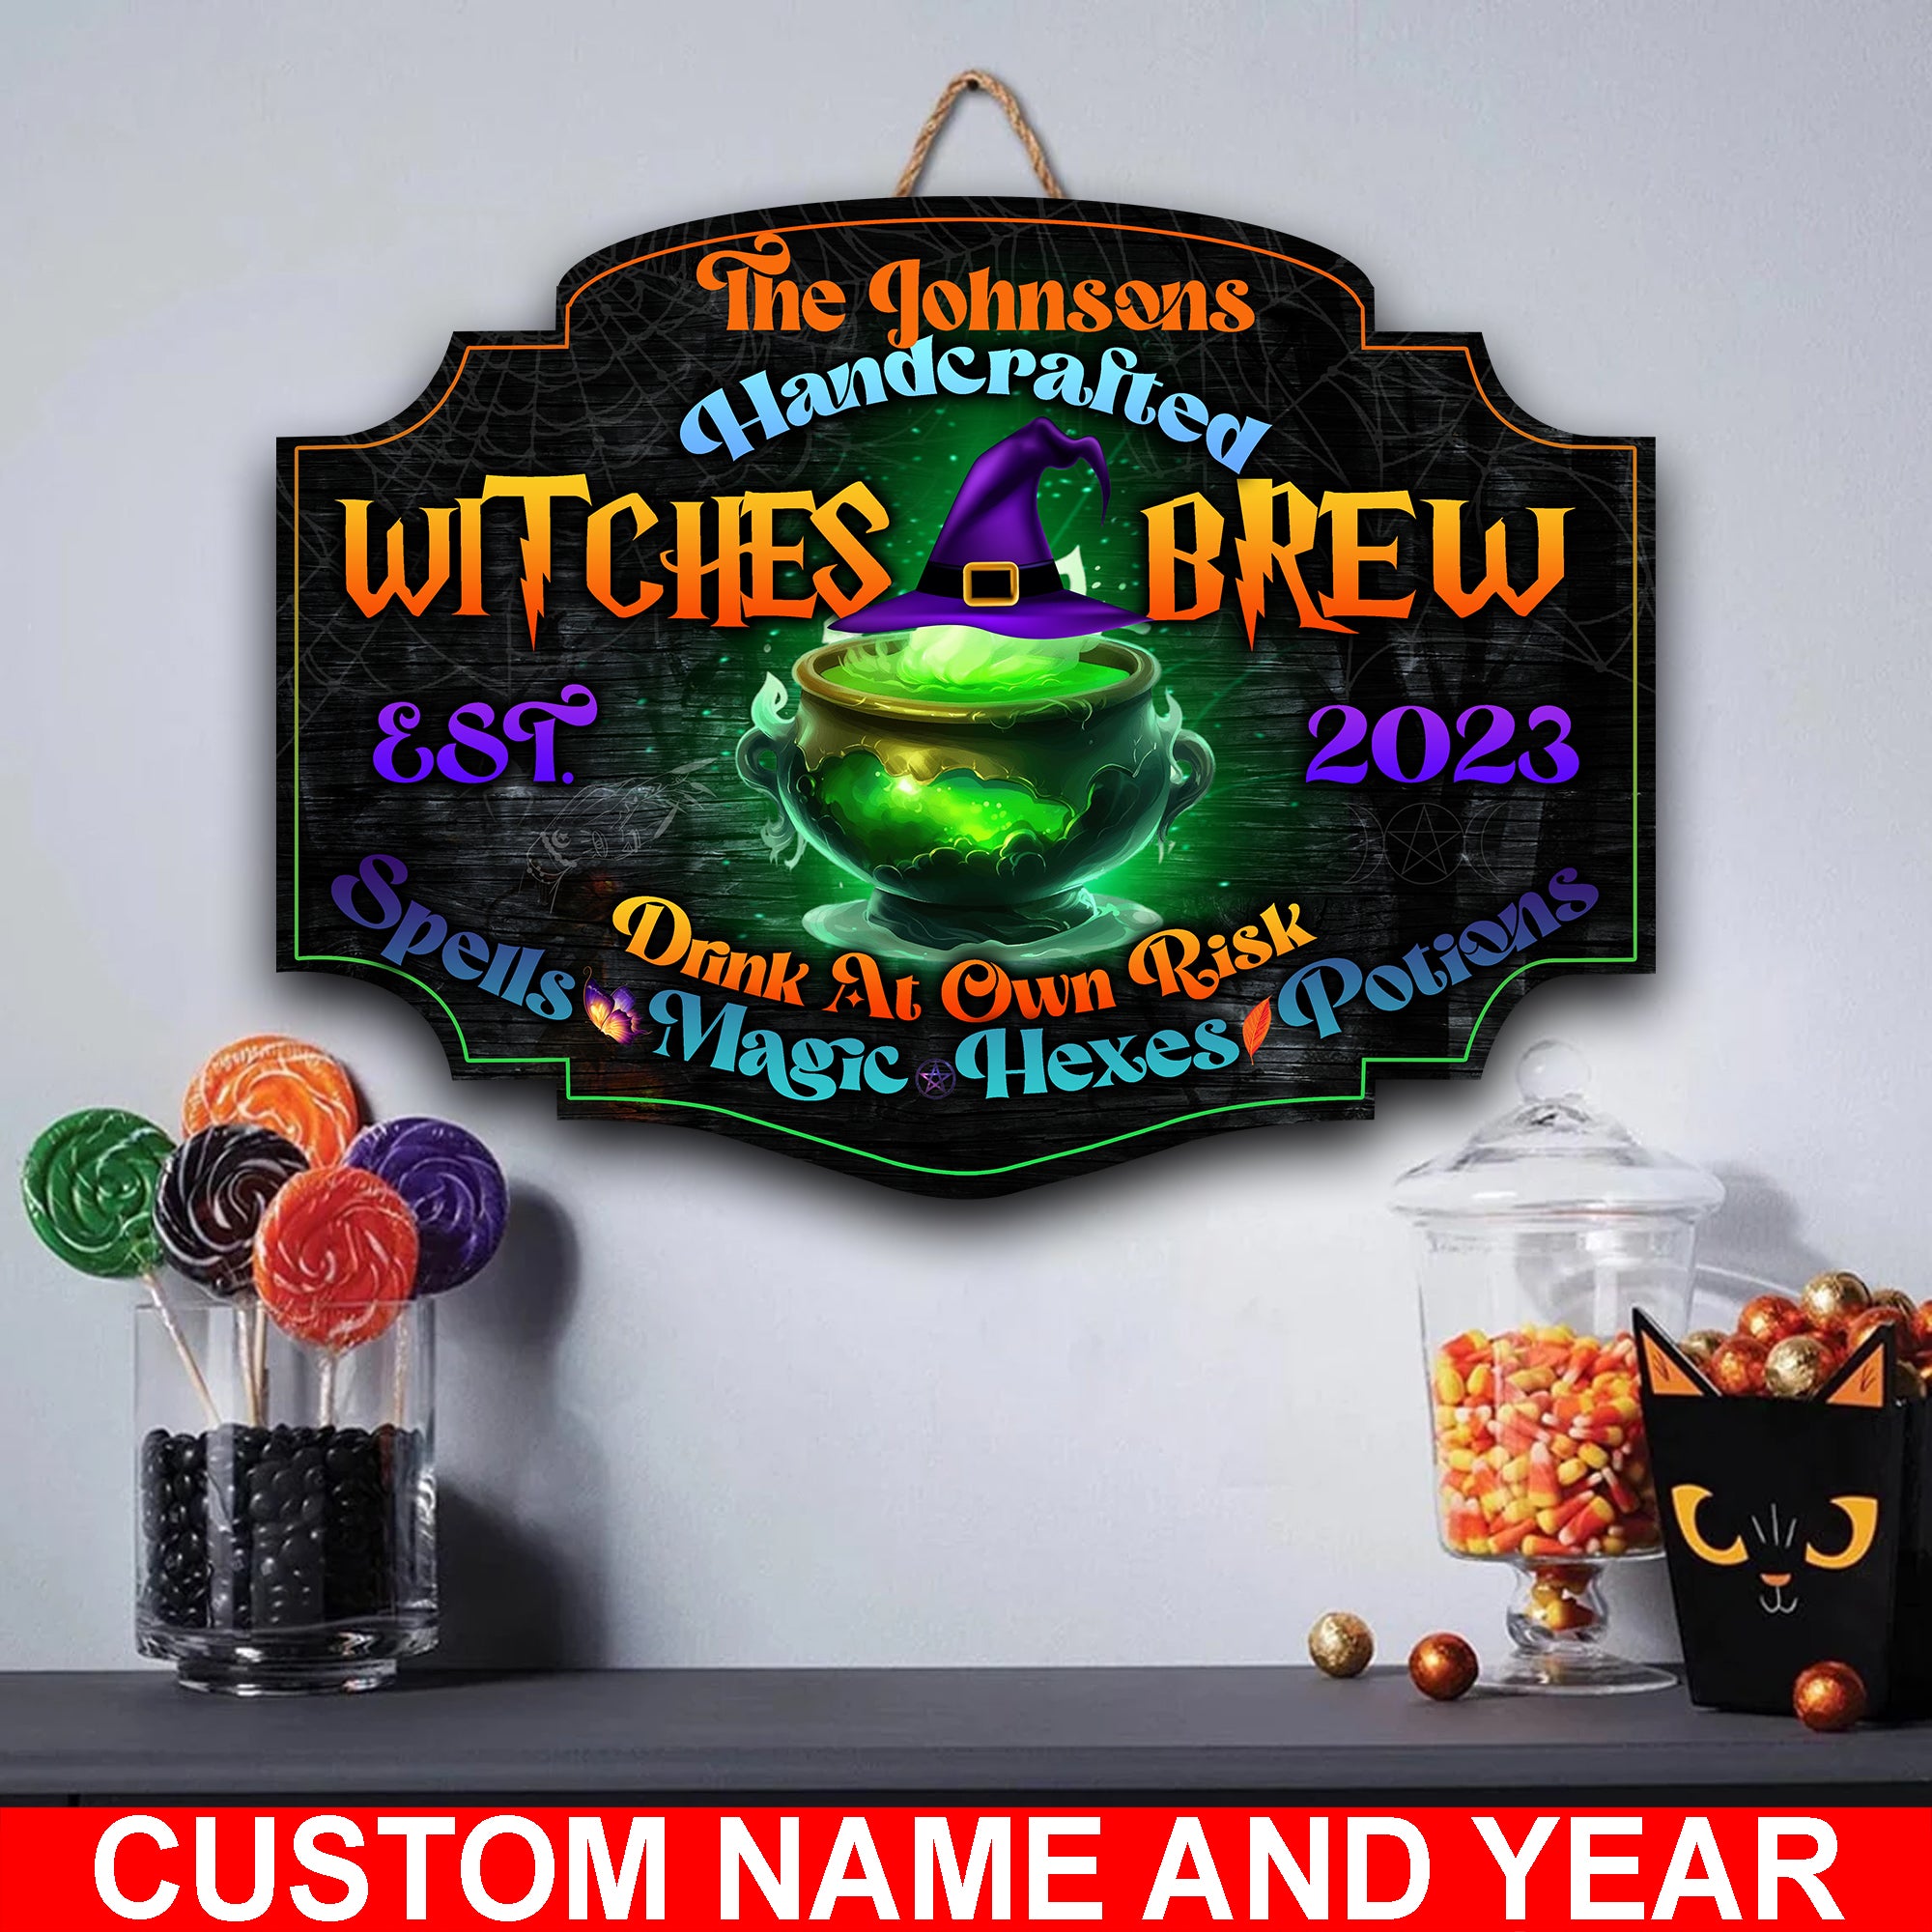 Handcrafted Witches Brew Drink At Own Risk - Custom Family Name And Year - Personalized Wooden Door Sign - Halloween Gift